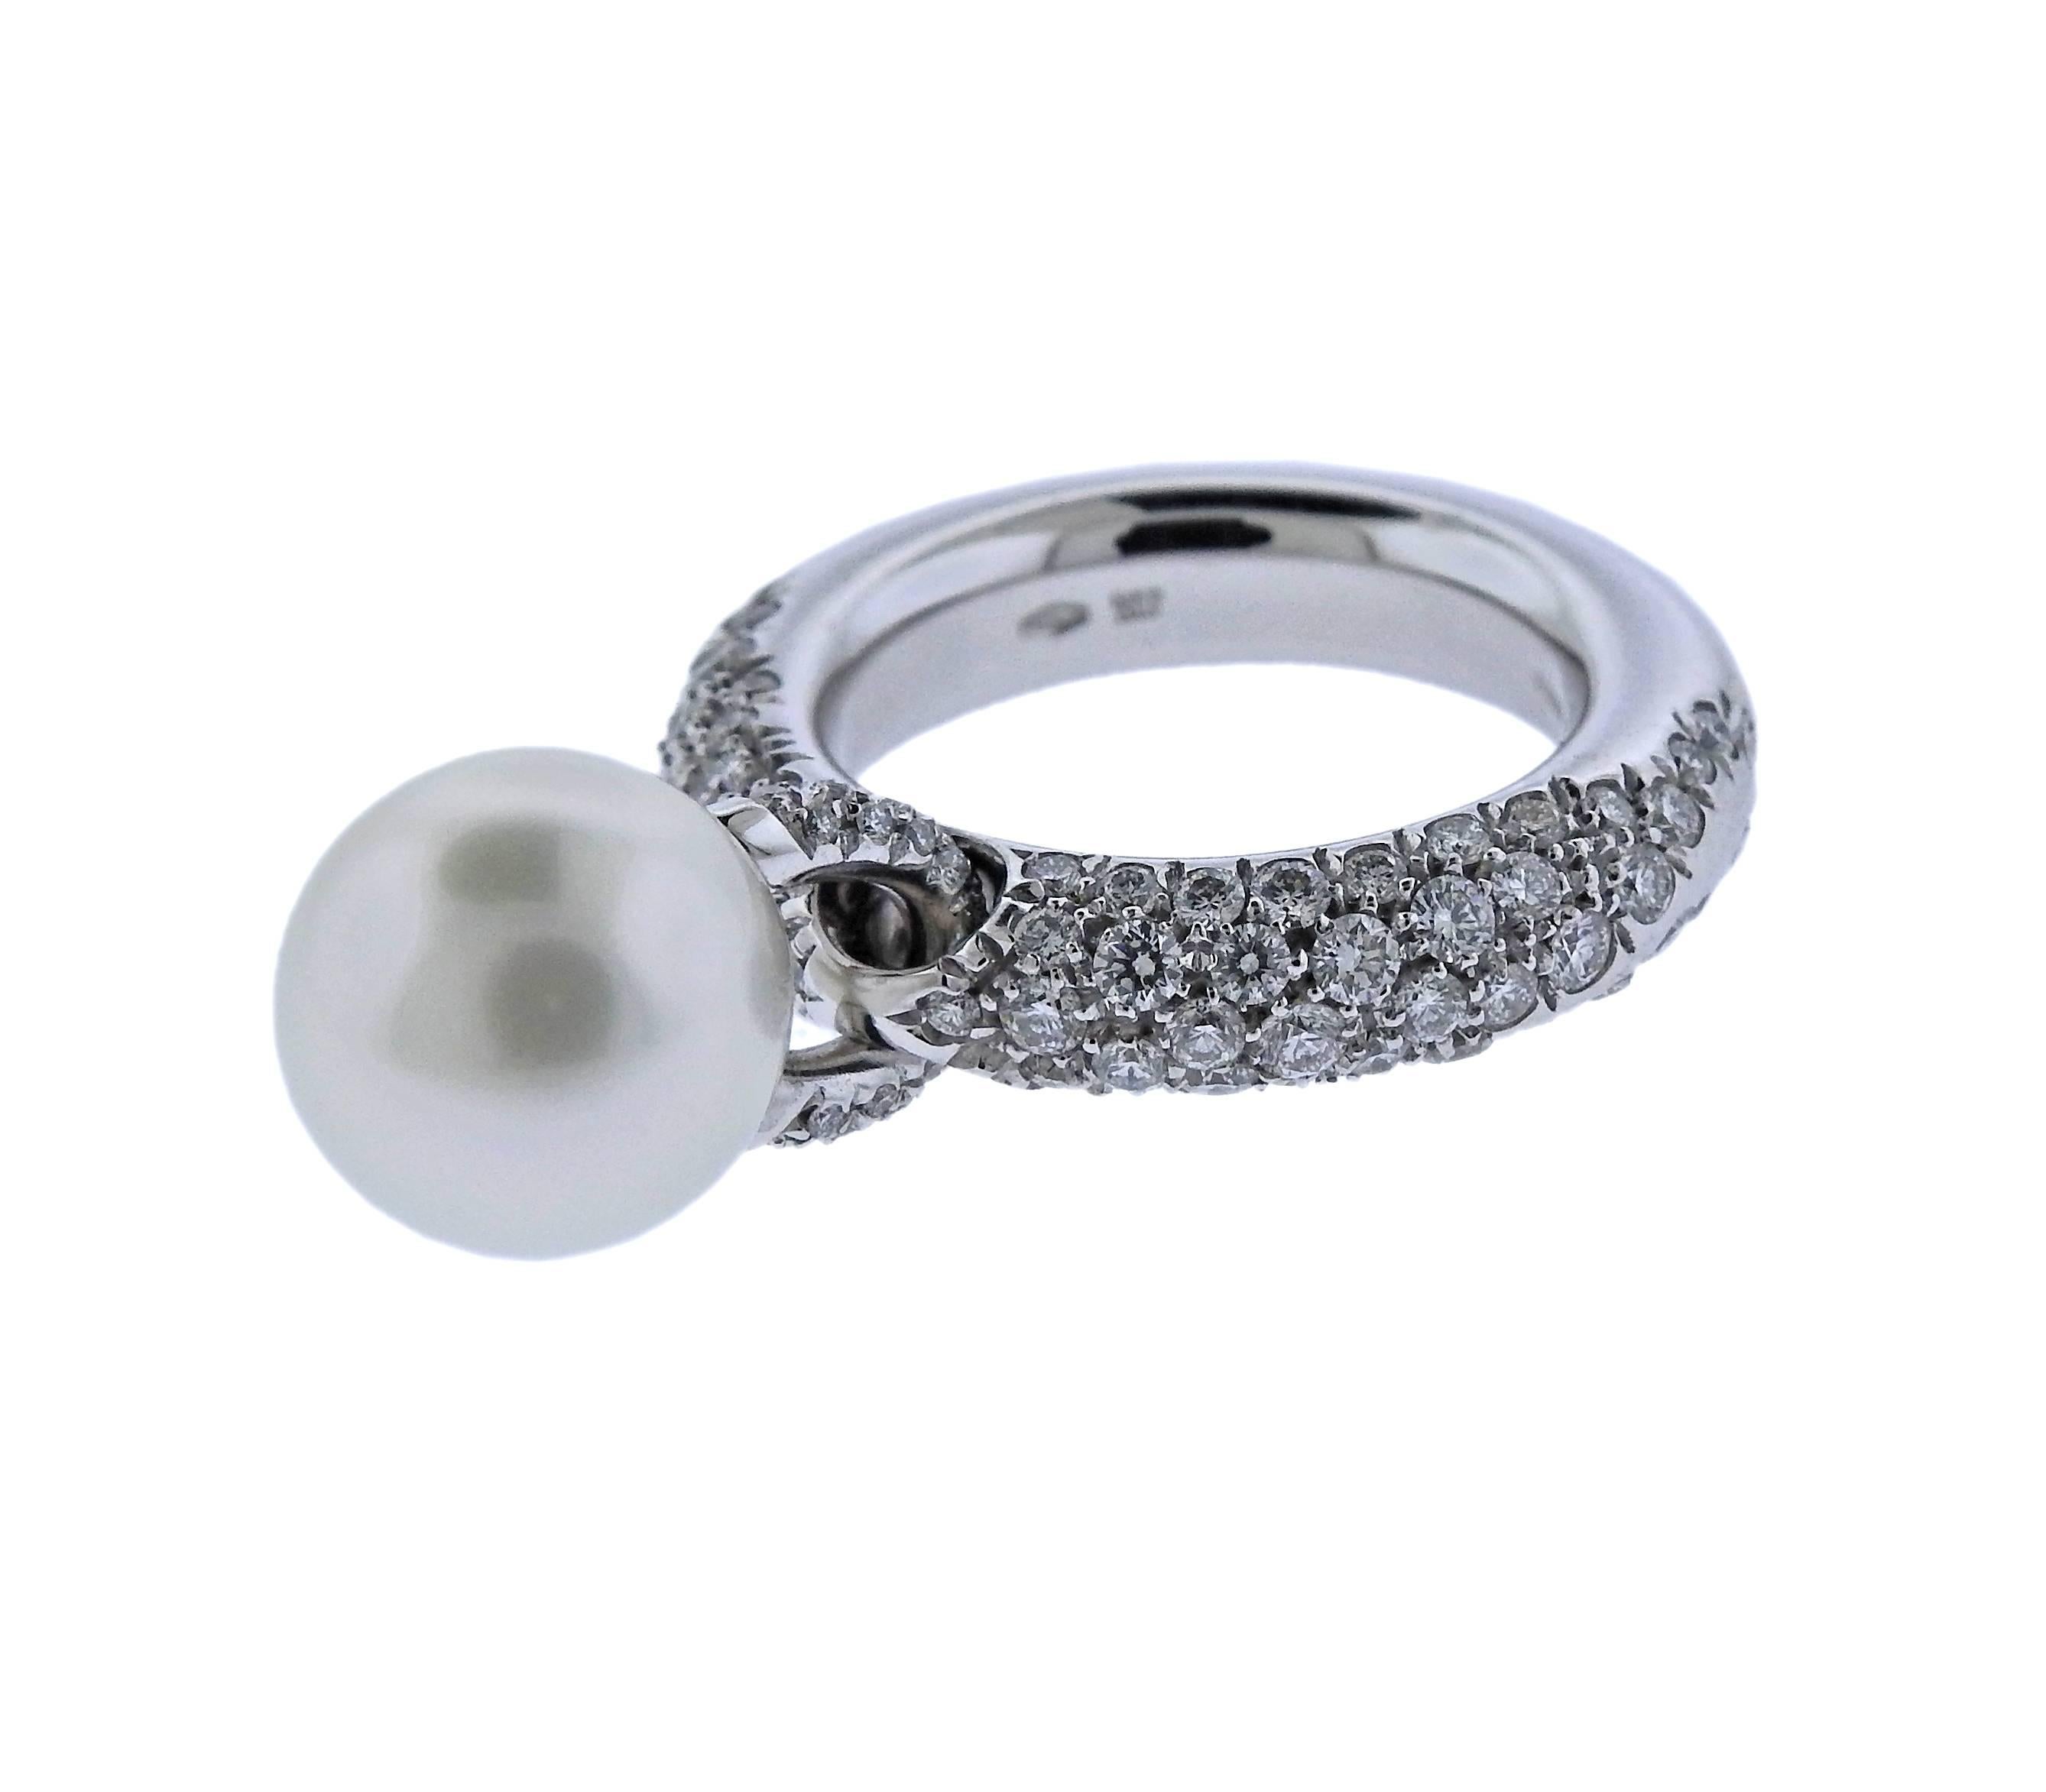 18k gold ring, crafted by Mikimoto, decorated with approx. 1.70ctw in diamonds and an 11.2mm south sea pearl . Ring size 7, shank is 5.4mm wide, weighs 18.3 grams. Marked: 750, made in Italy, 2294AI, M hallmark.